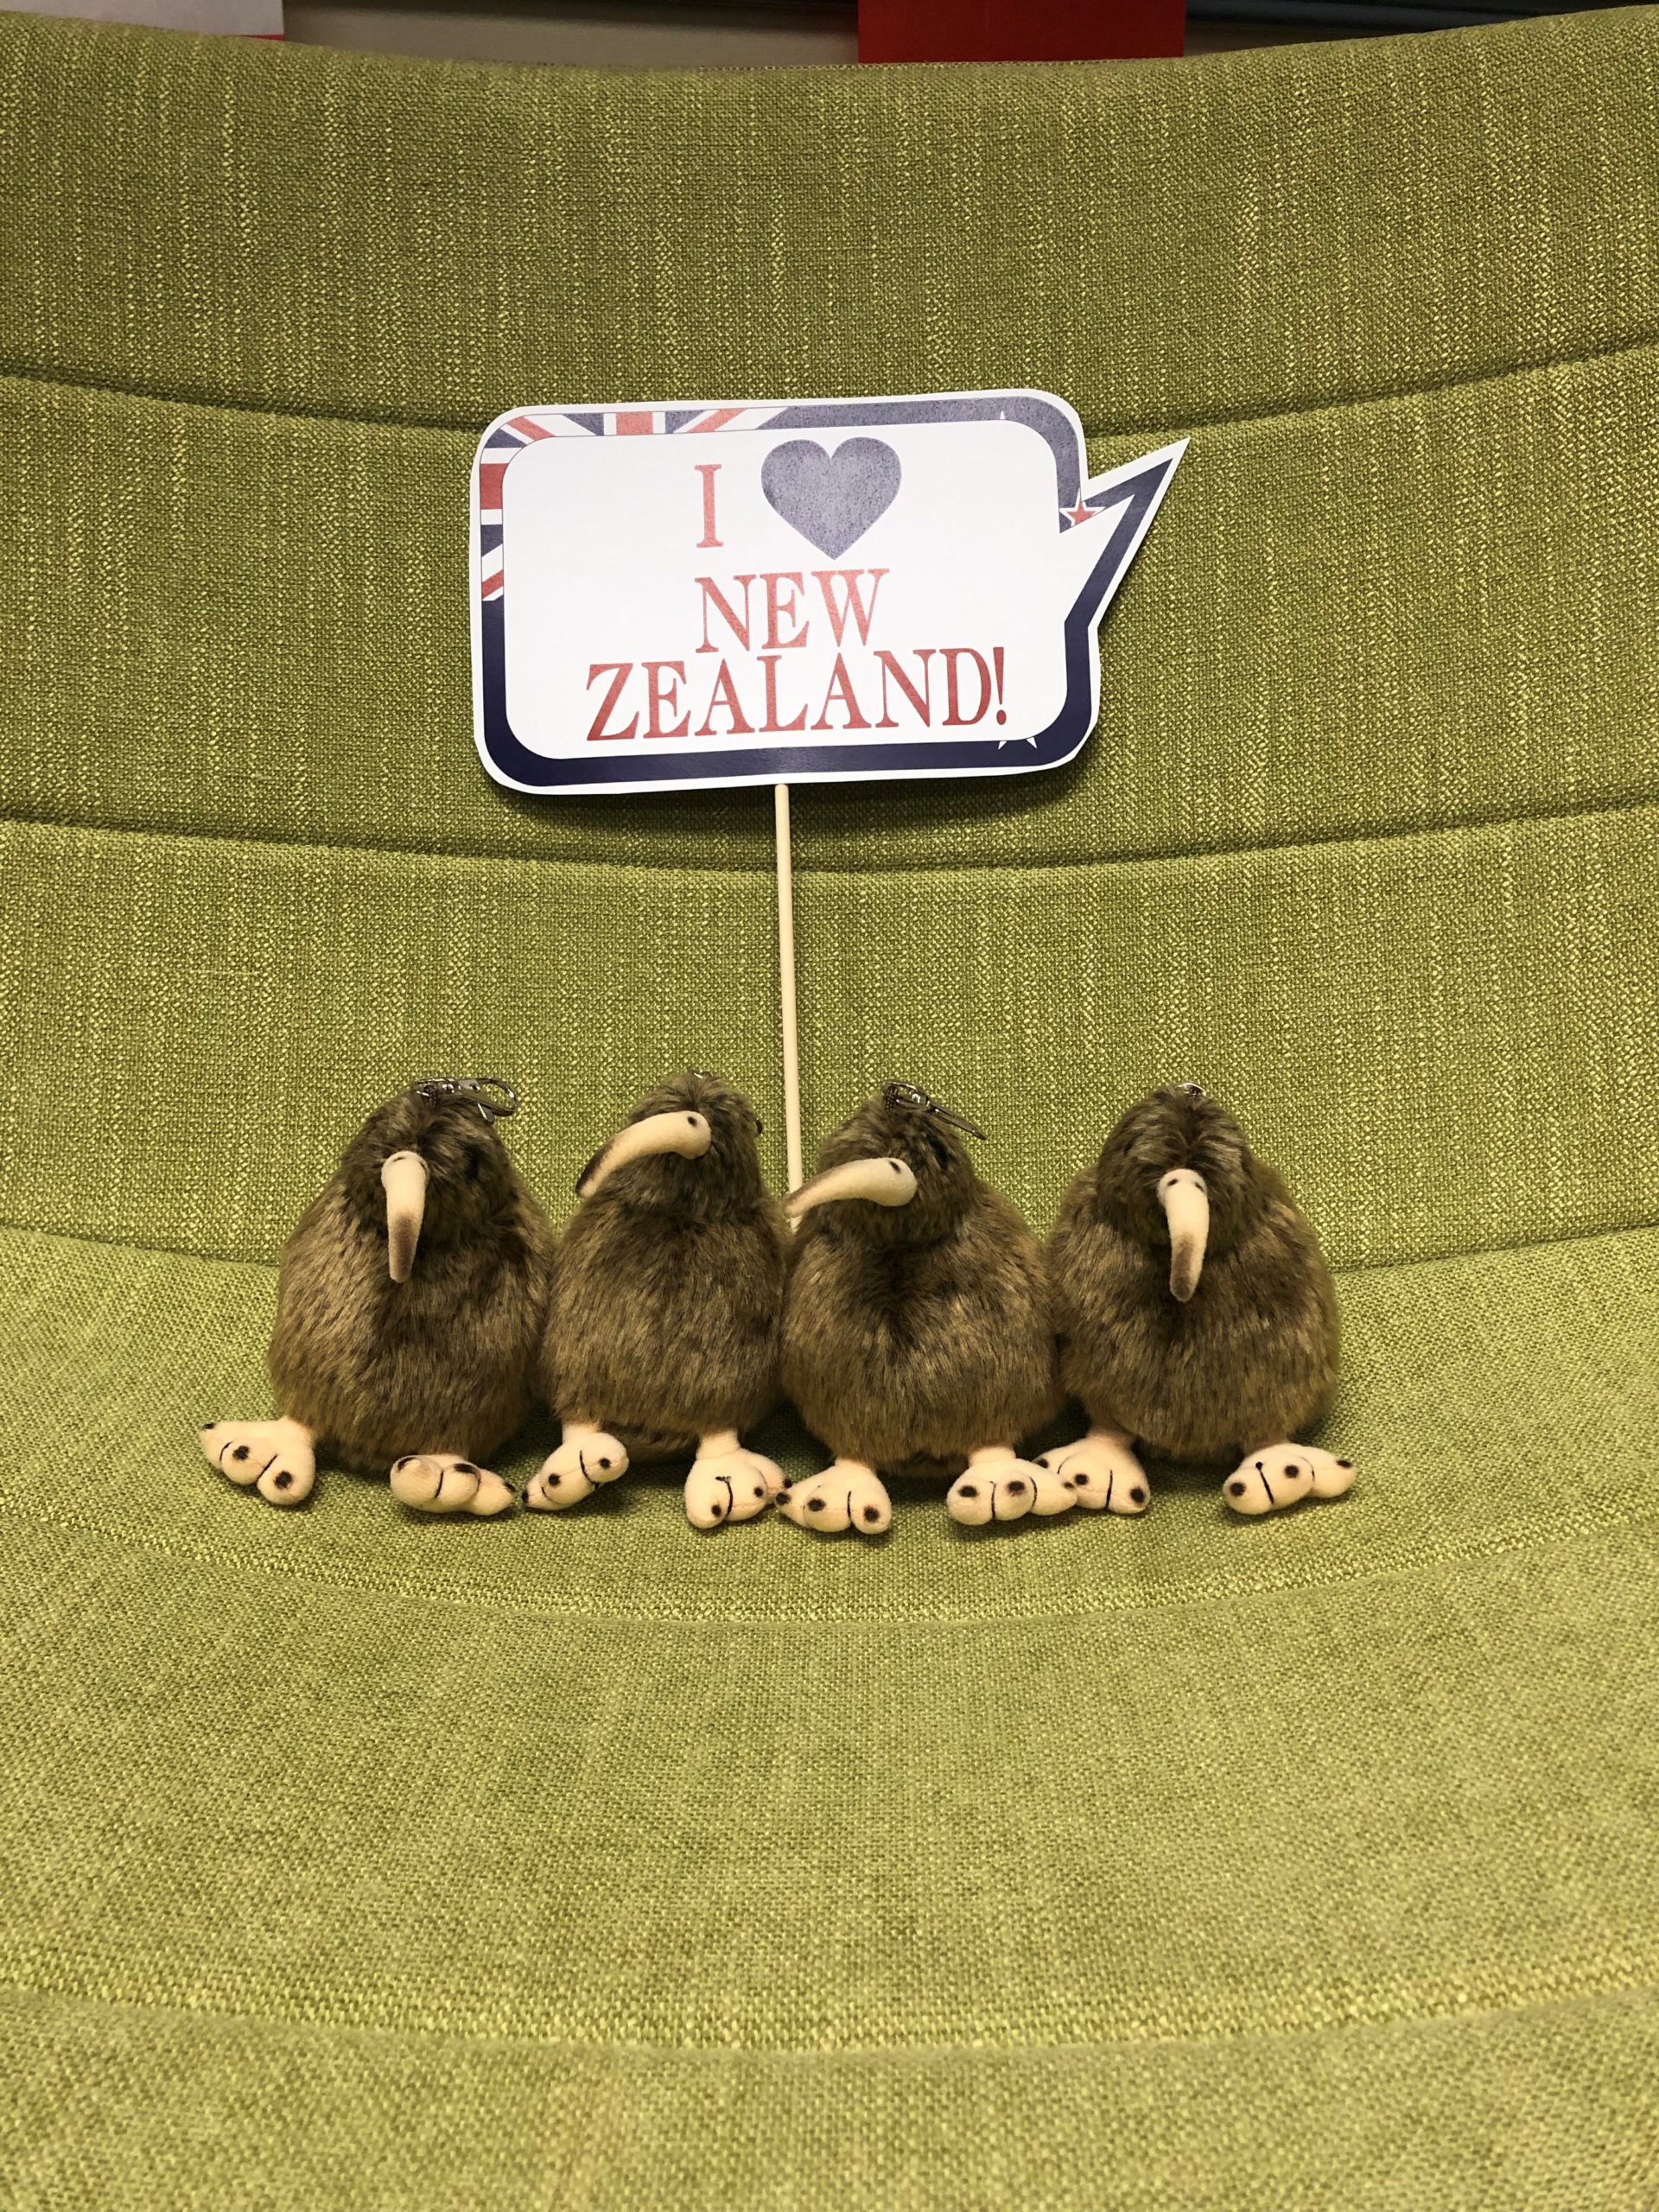 Though this year's summit was virtual, the Riley Institute brought New Zealand to the delegates. Pictured here are plush Kiwi birds, just one of the New Zealand-themed items they received